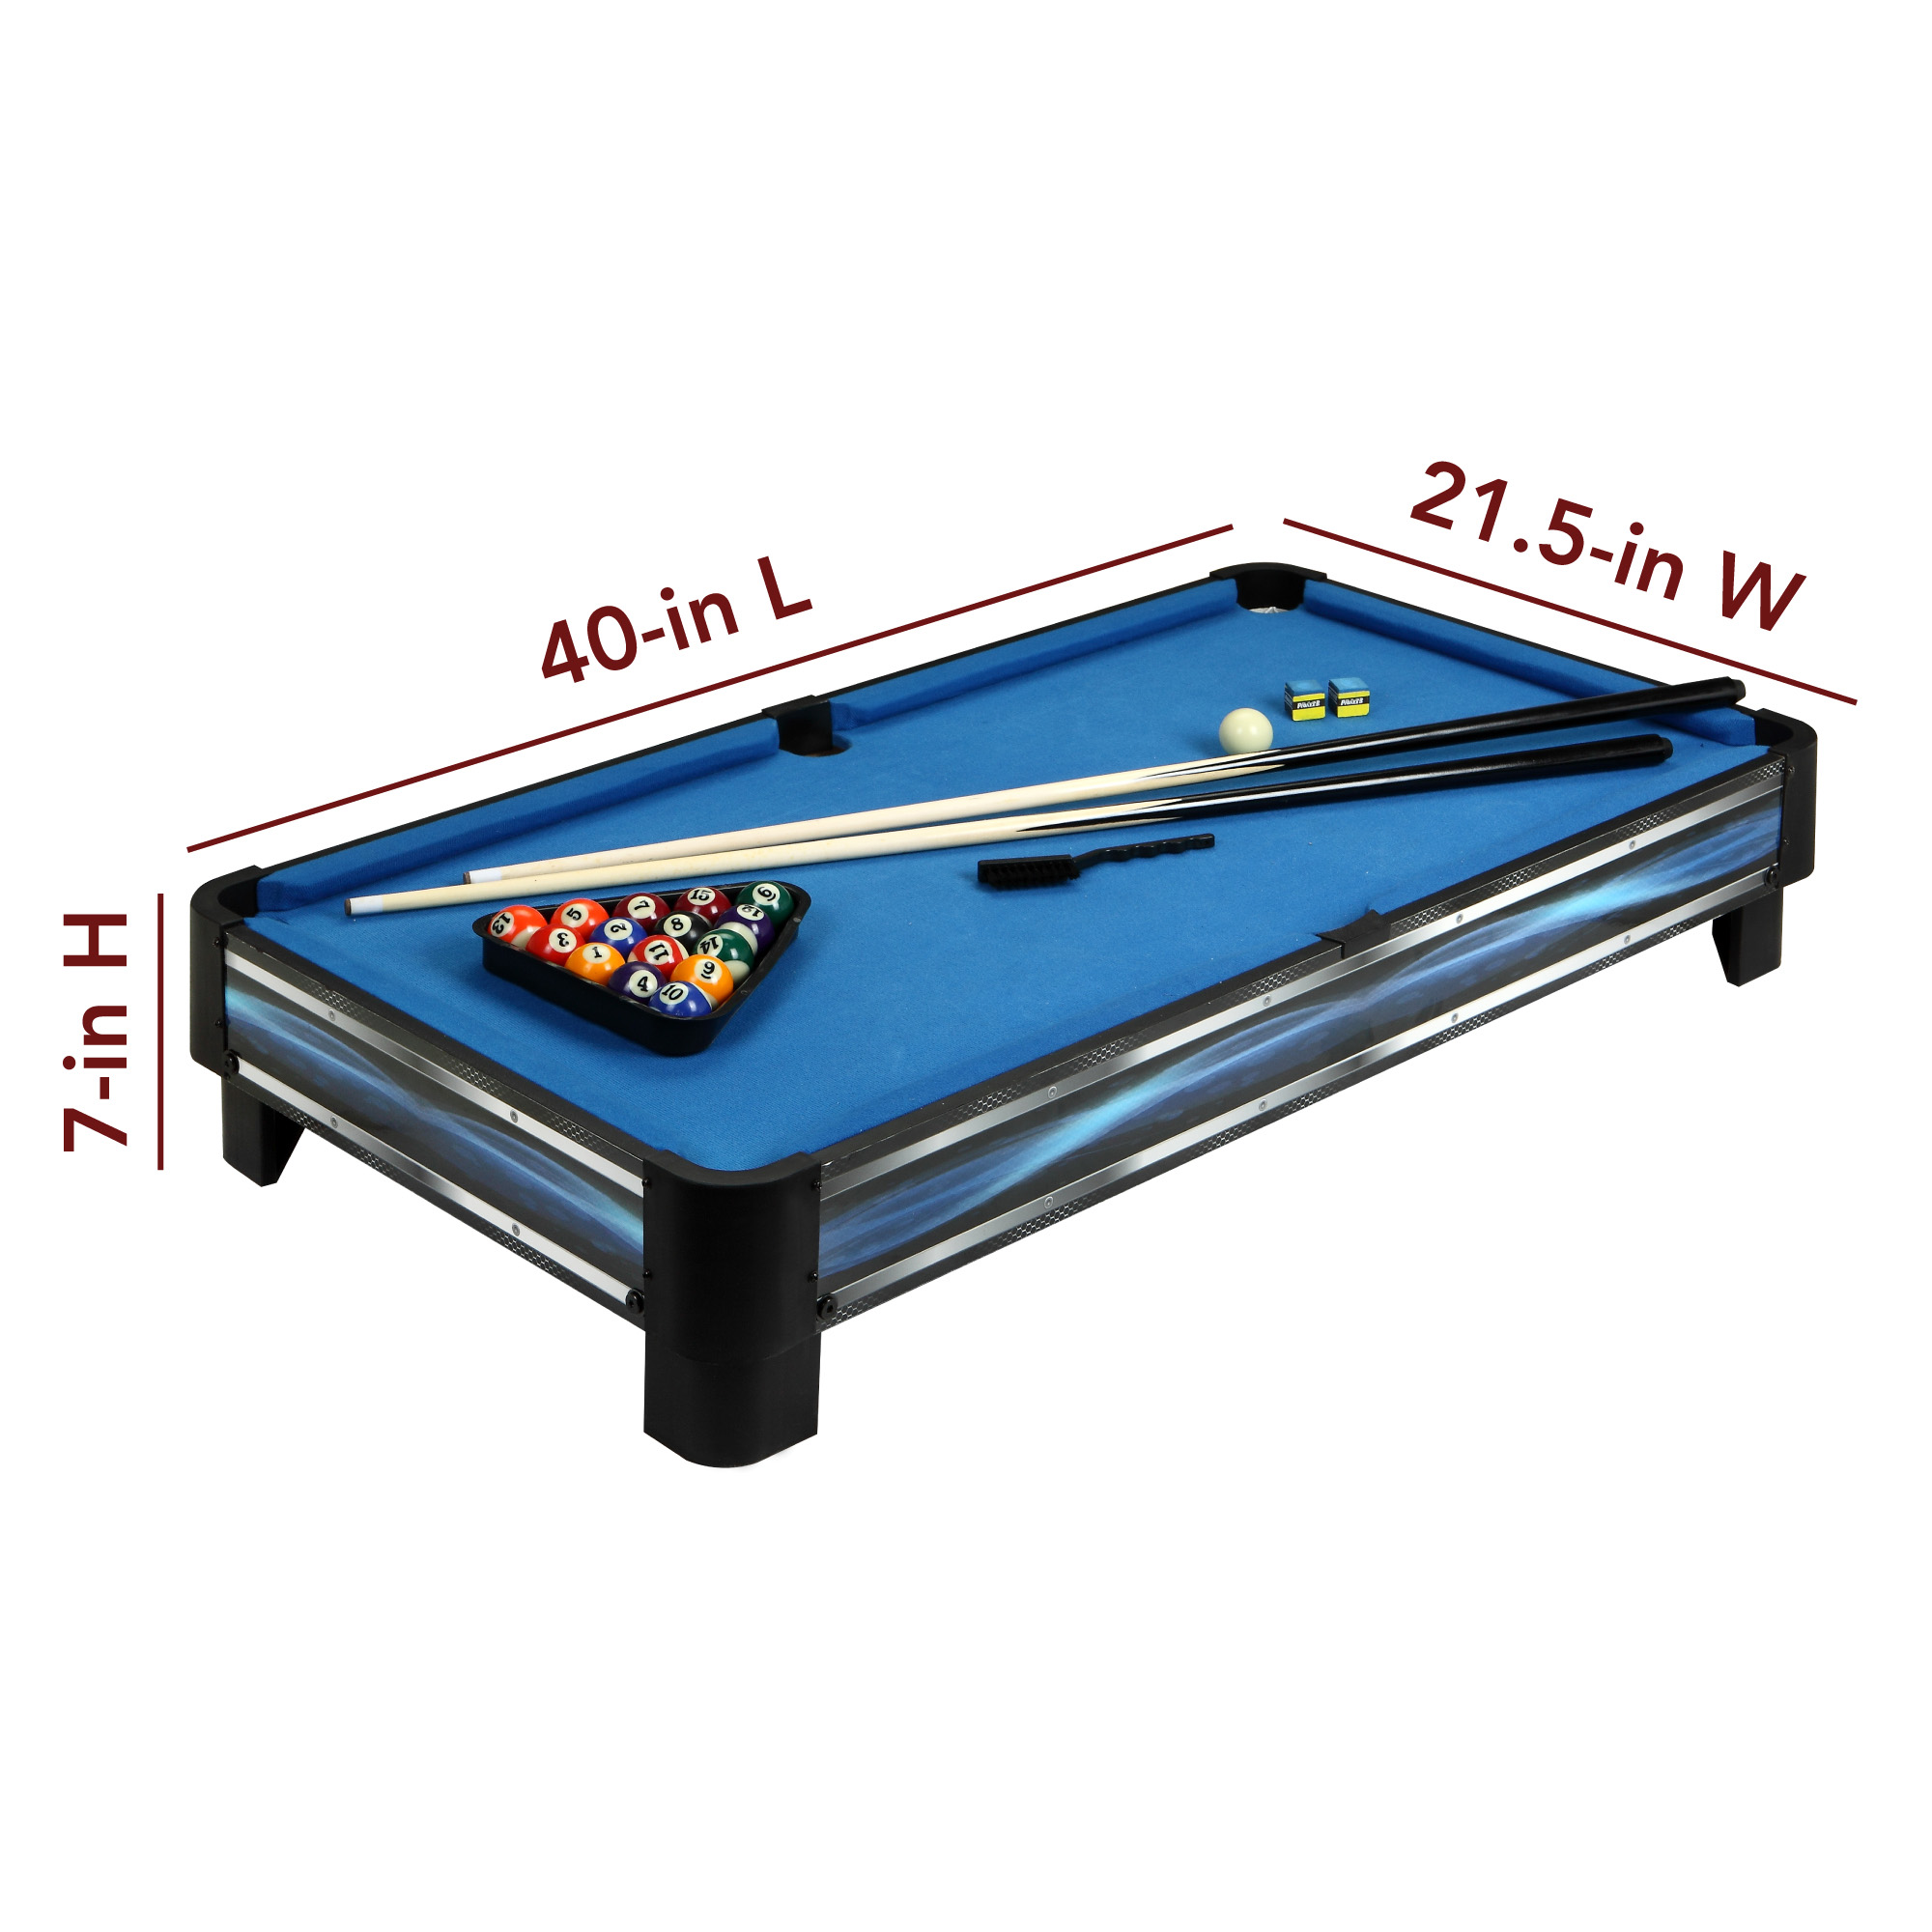 Hathaway Breakout Tabletop Pool Table, 40 In. Blue - image 5 of 7